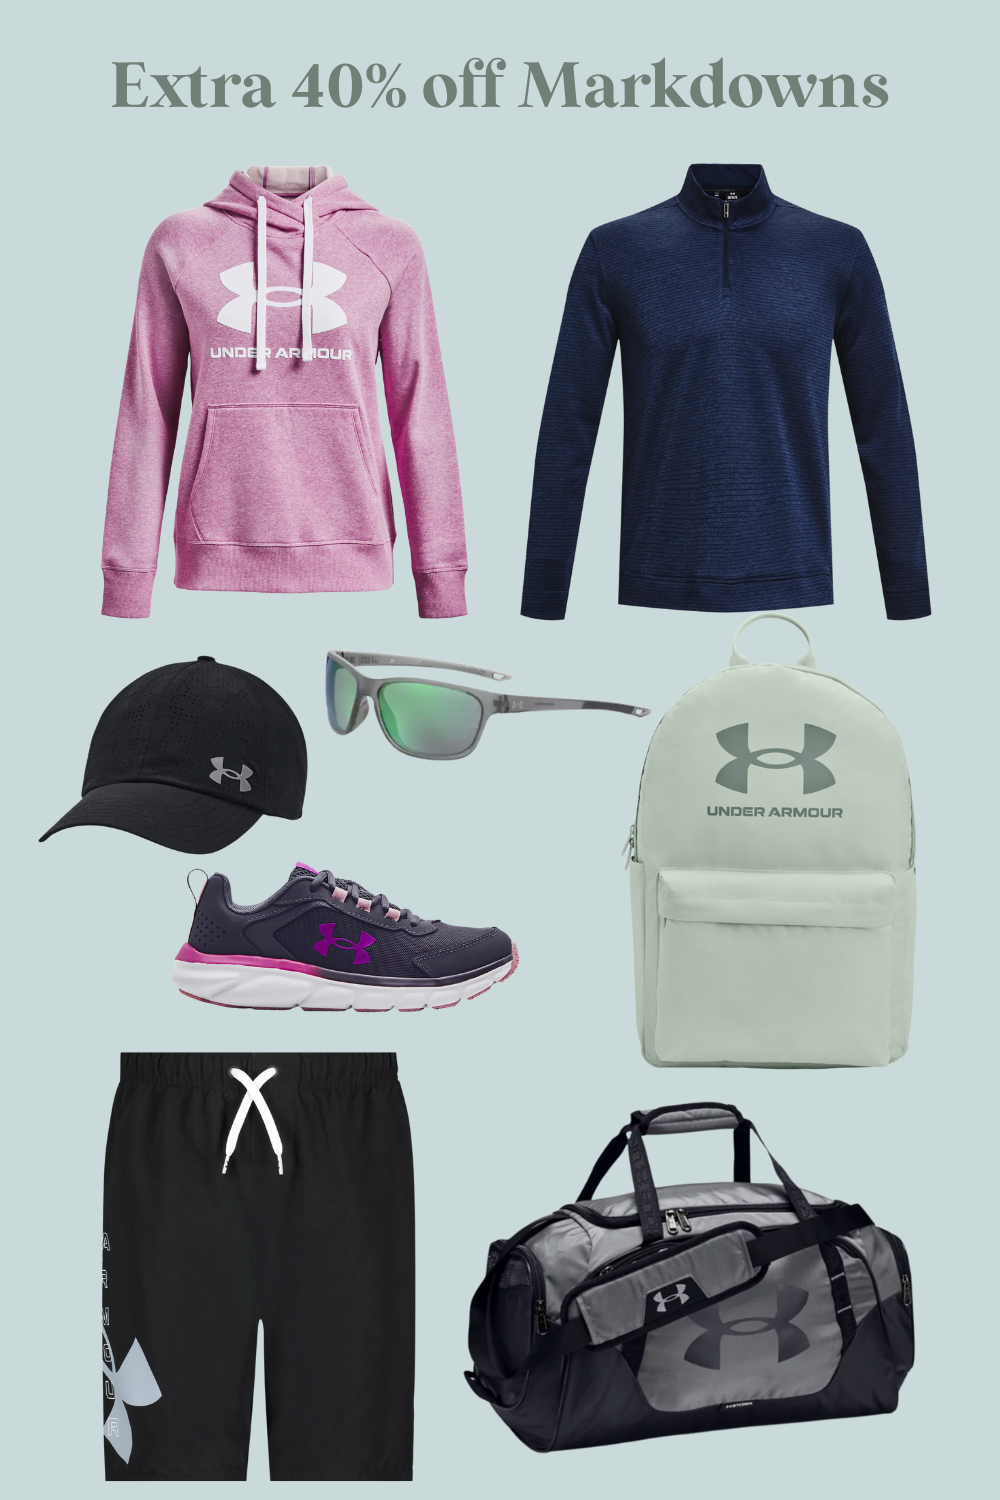 Under Armour Extra 40% off Markdowns